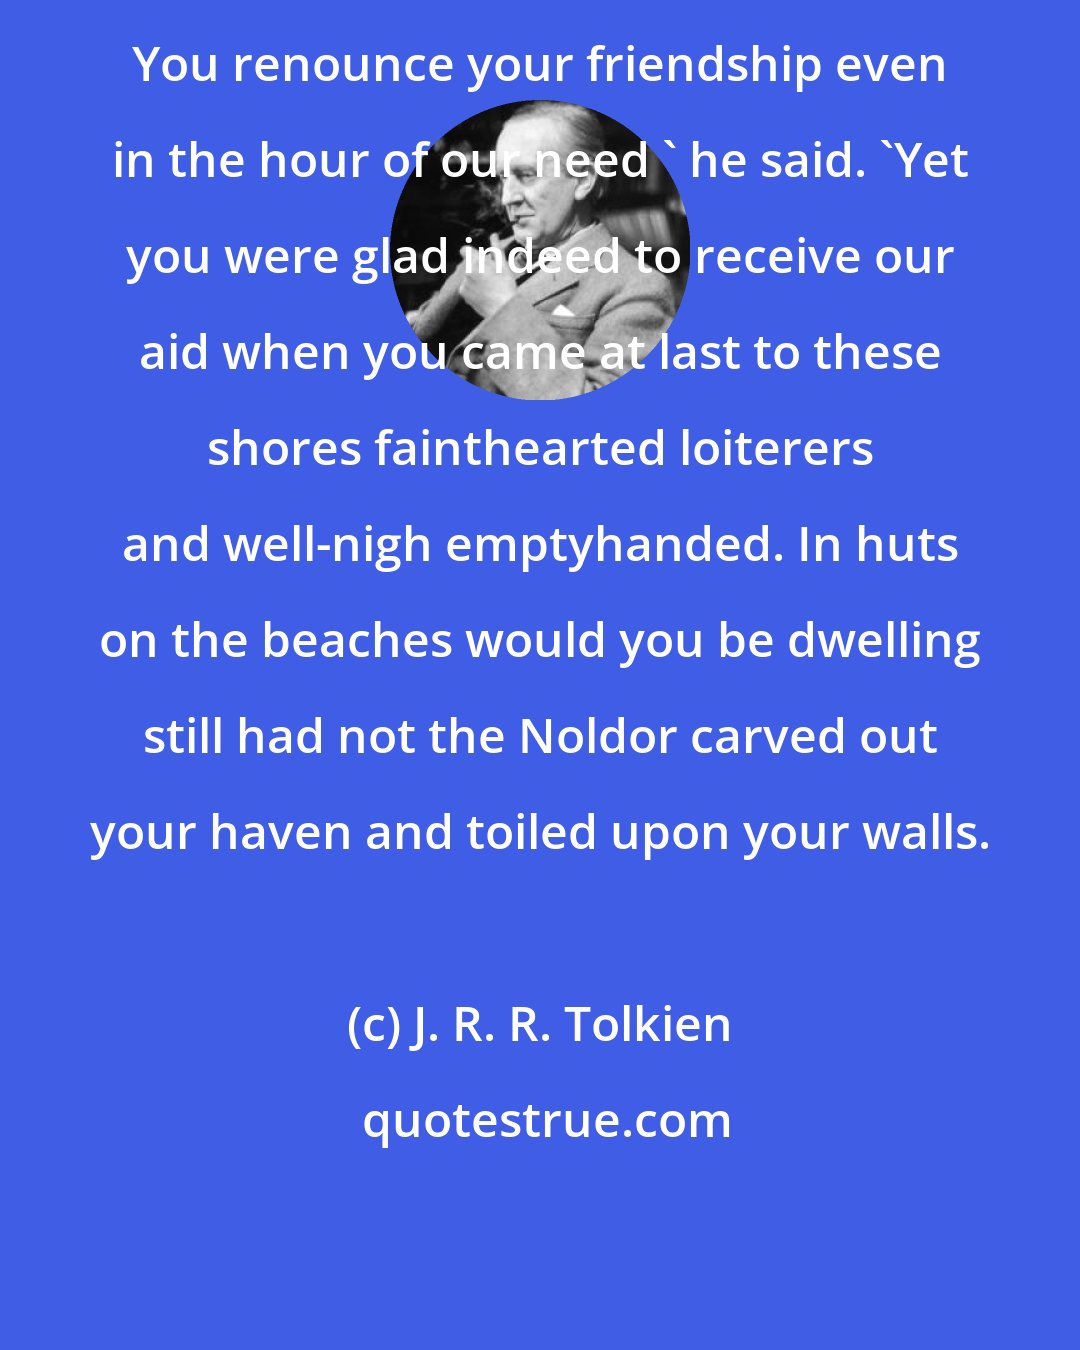 J. R. R. Tolkien: You renounce your friendship even in the hour of our need ' he said. 'Yet you were glad indeed to receive our aid when you came at last to these shores fainthearted loiterers and well-nigh emptyhanded. In huts on the beaches would you be dwelling still had not the Noldor carved out your haven and toiled upon your walls.